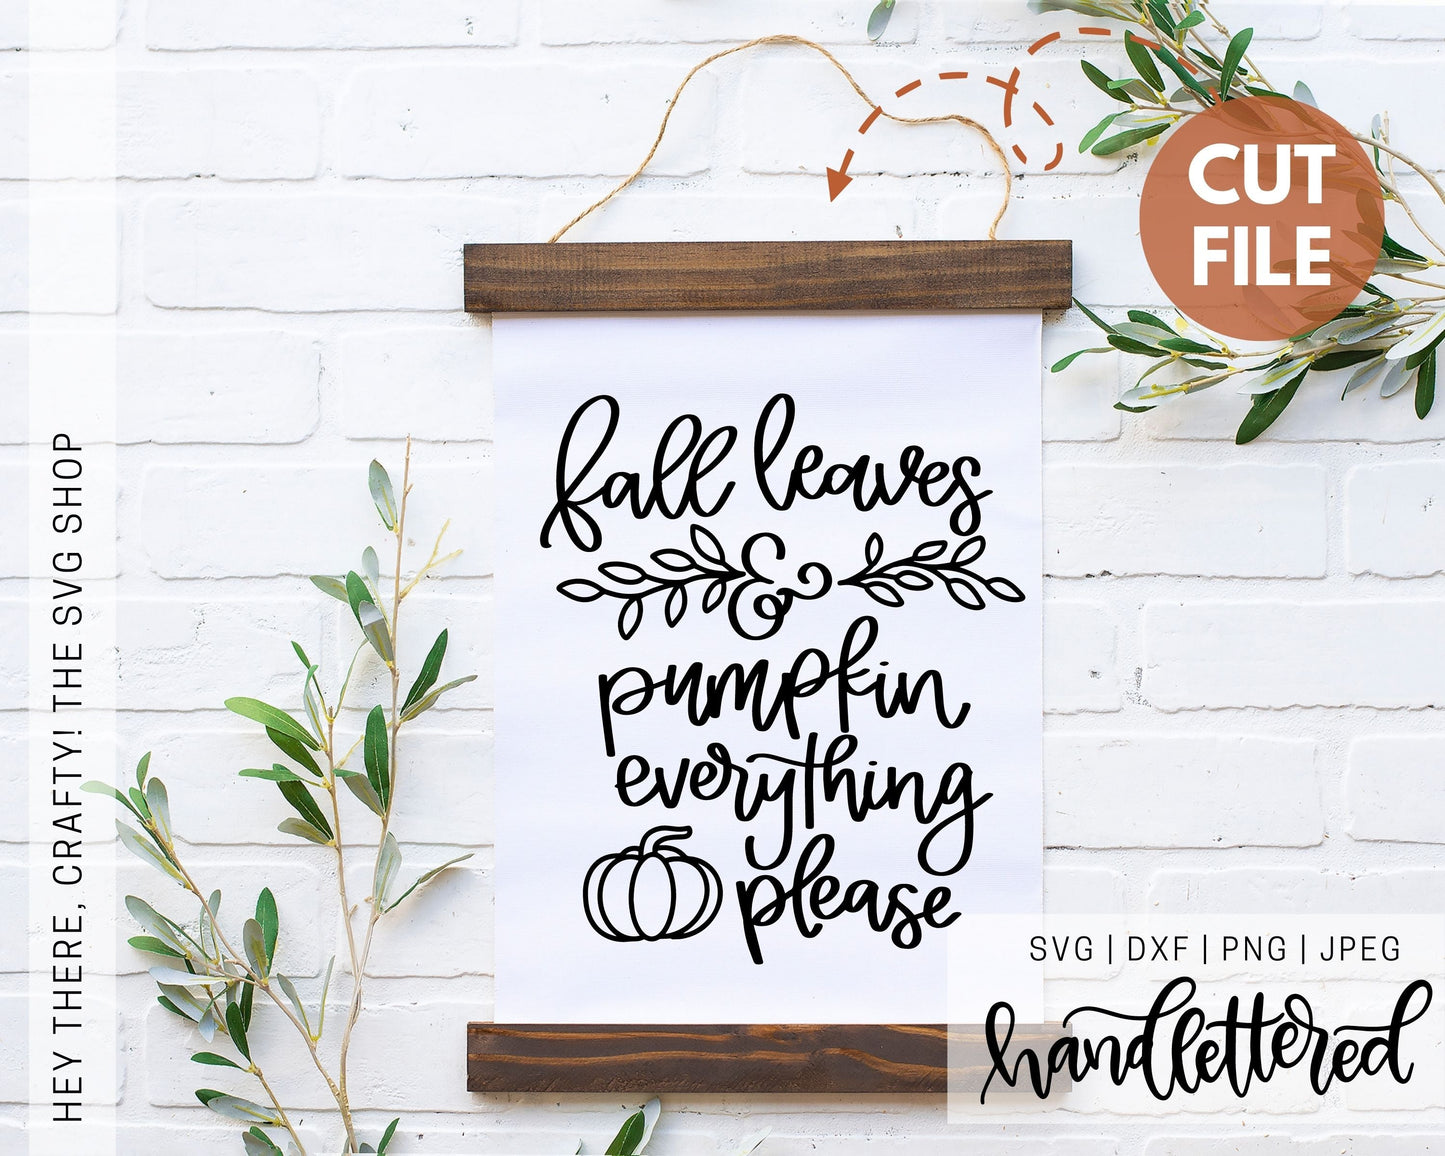 Fall Leaves and Pumpkins Please| SVG, PNG, DXF, JPEG